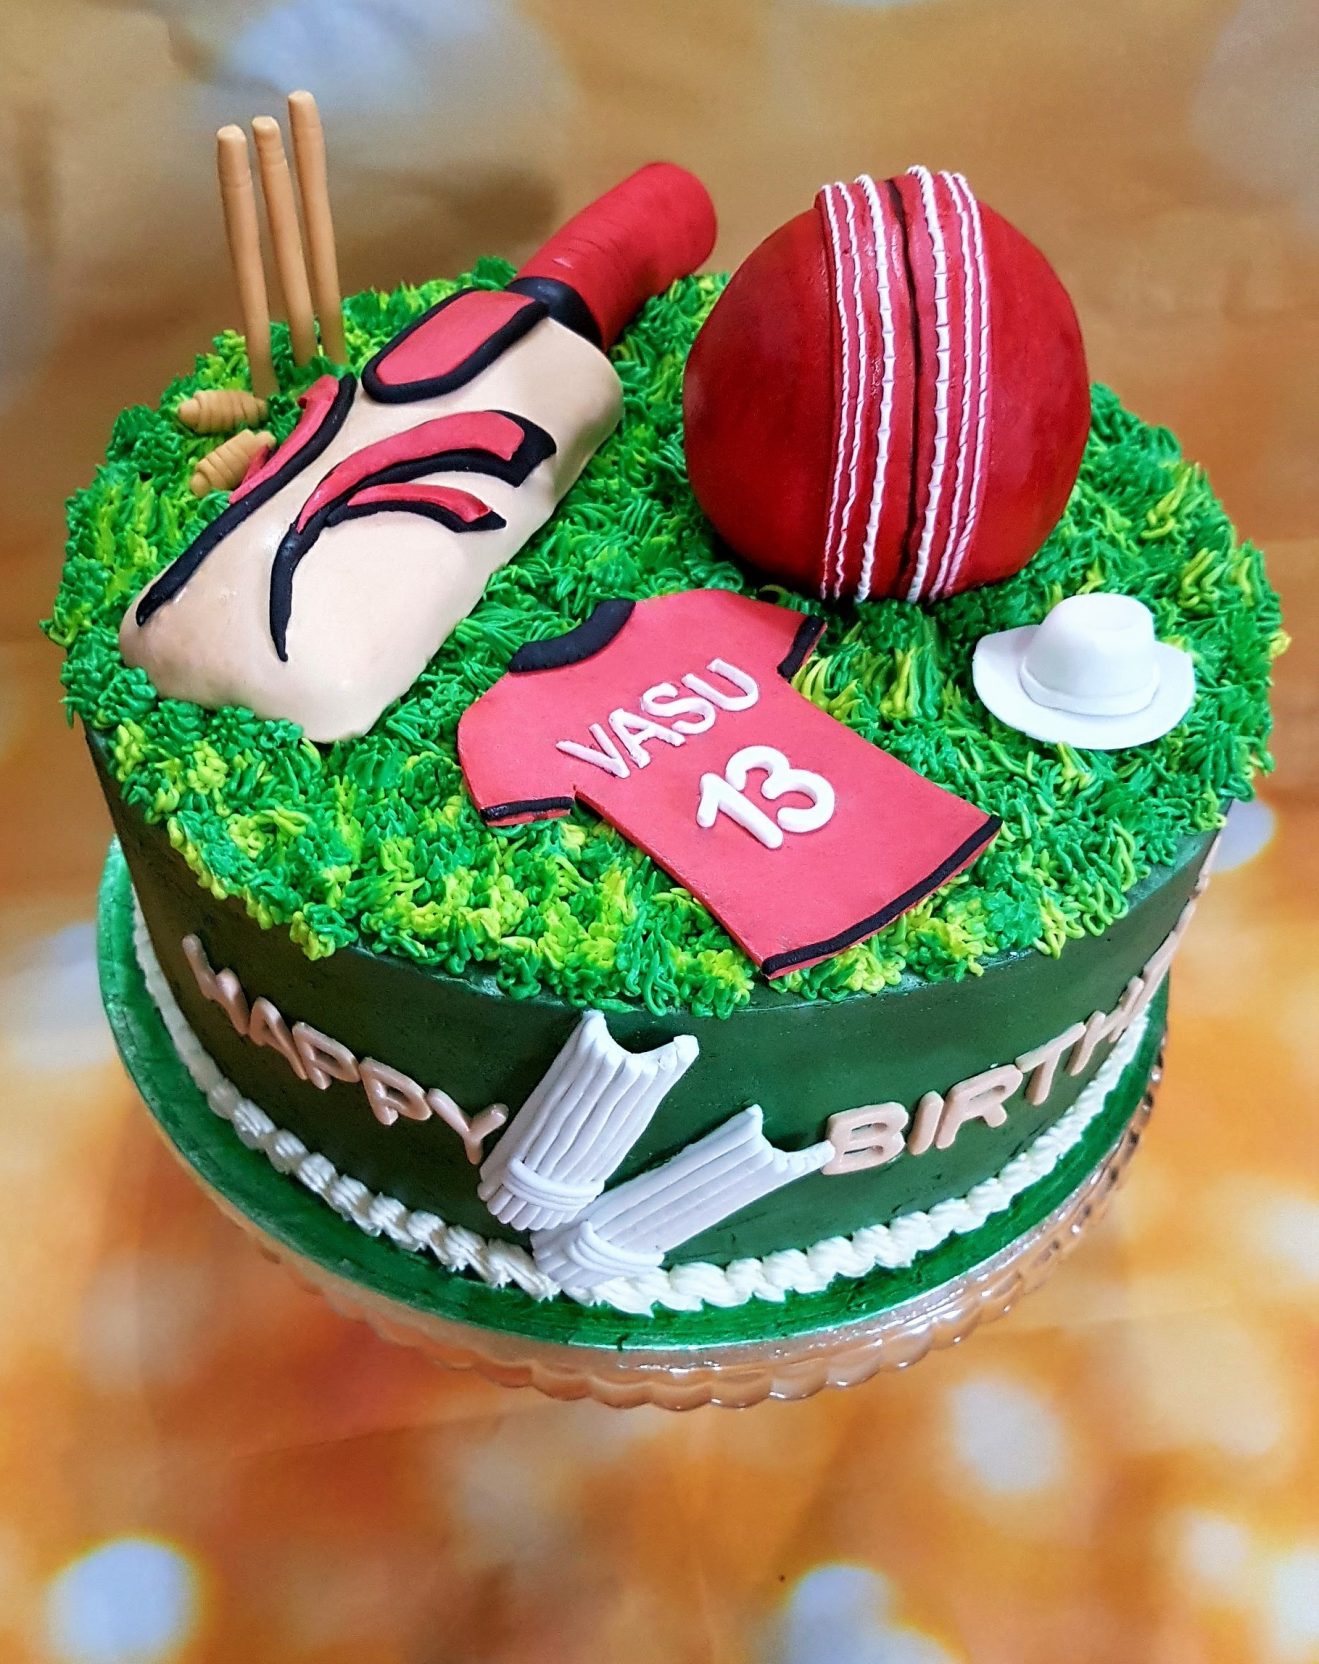 Cricket Themed Cake - Cakes by Mehwish